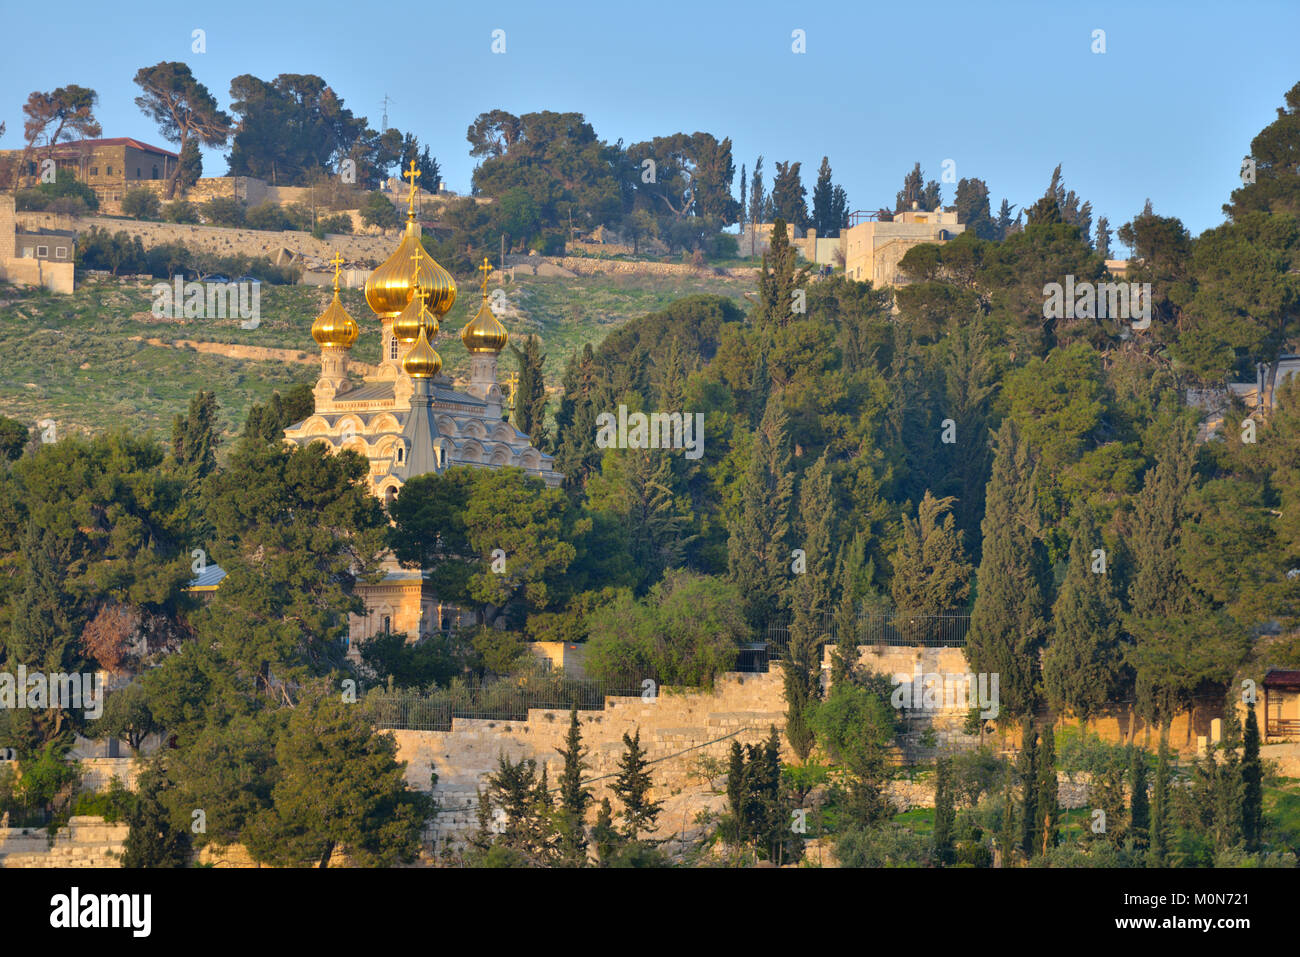 Jerusalem, Israel - March 20, 2014: Church of Mary Magdalene on the Mount of Olives, near the Garden of Gethsemane. Stock Photo